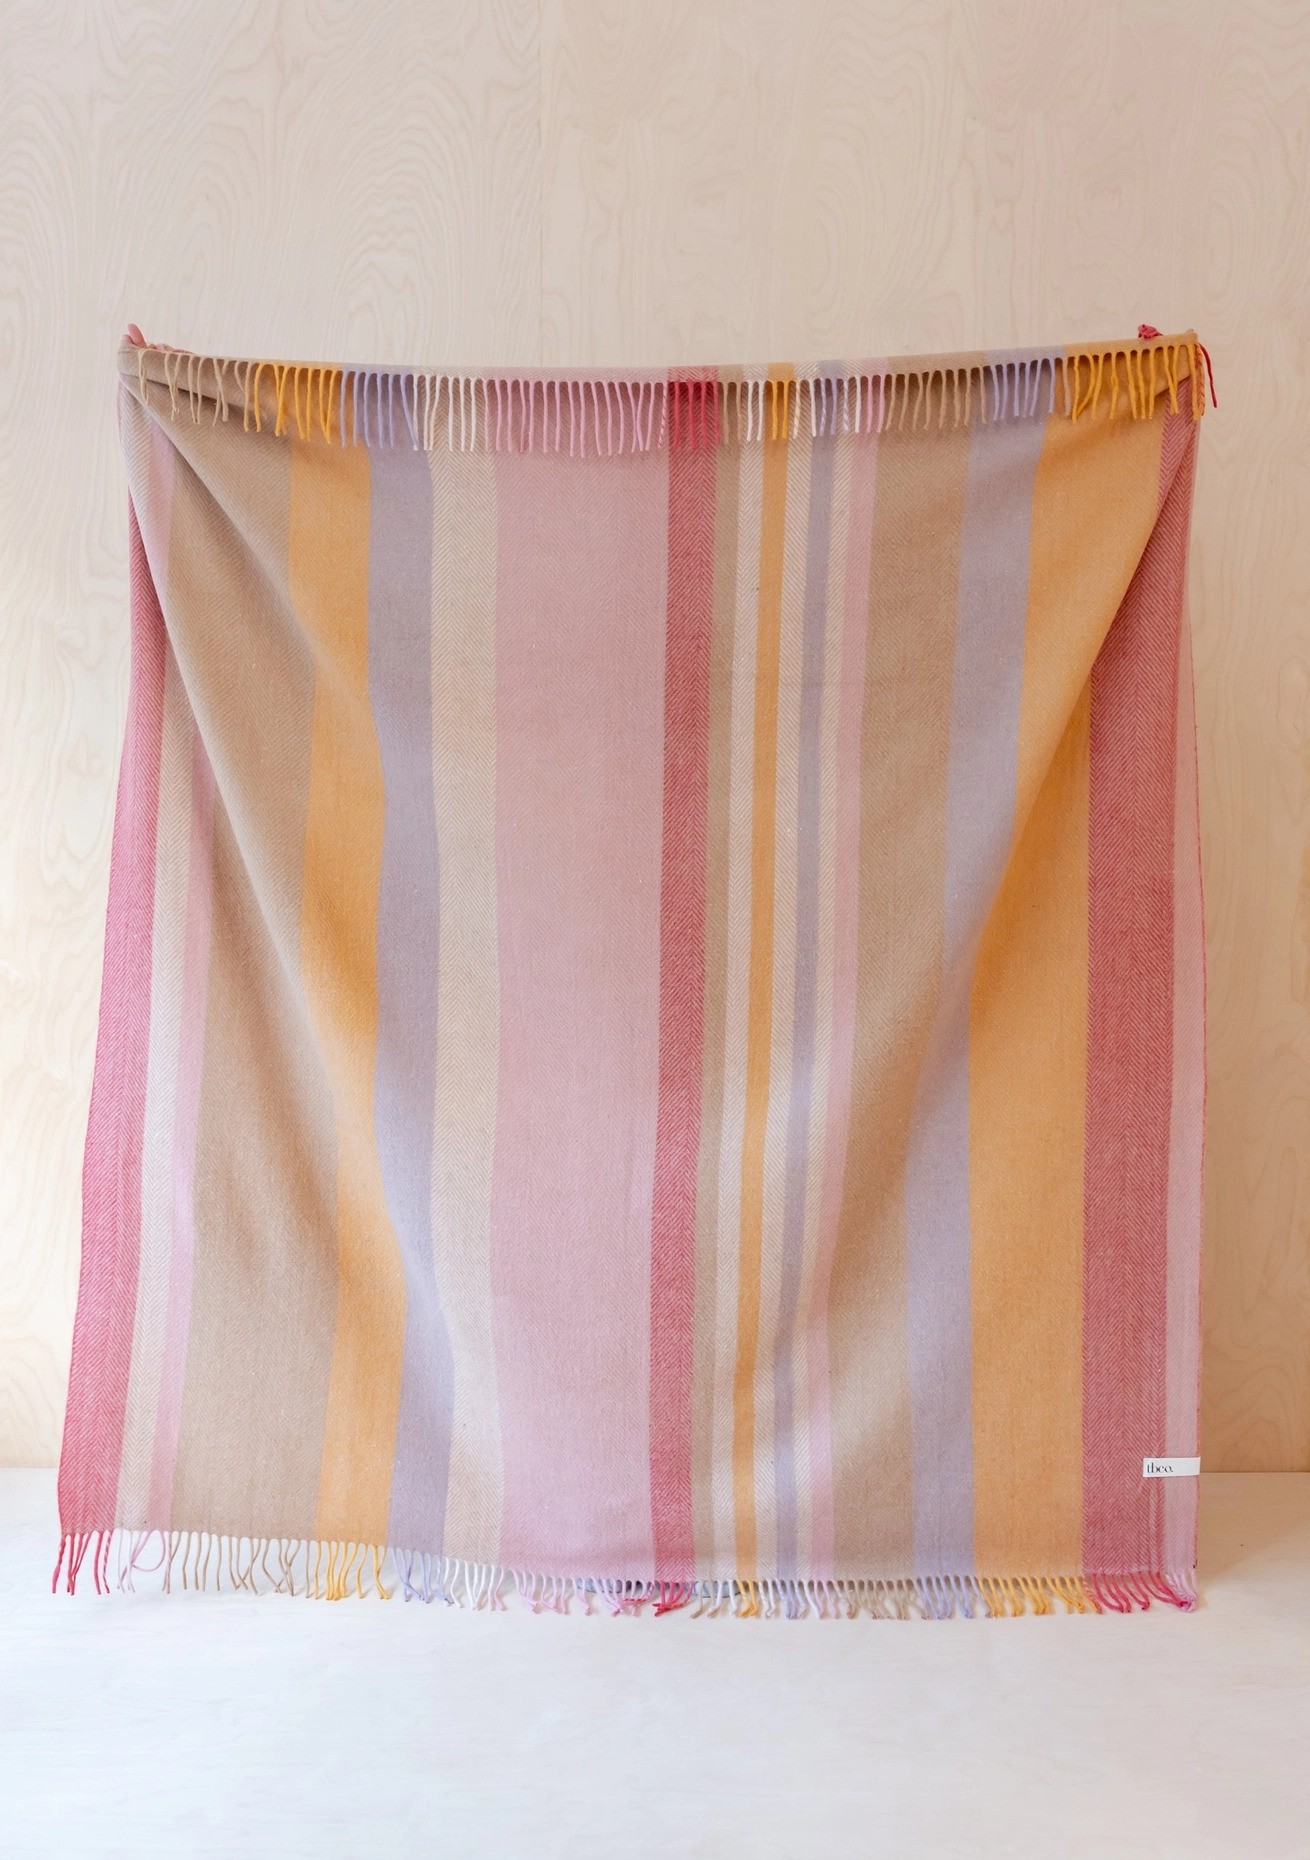 TBCo Recycled Wool Blanket in Coral Stripe